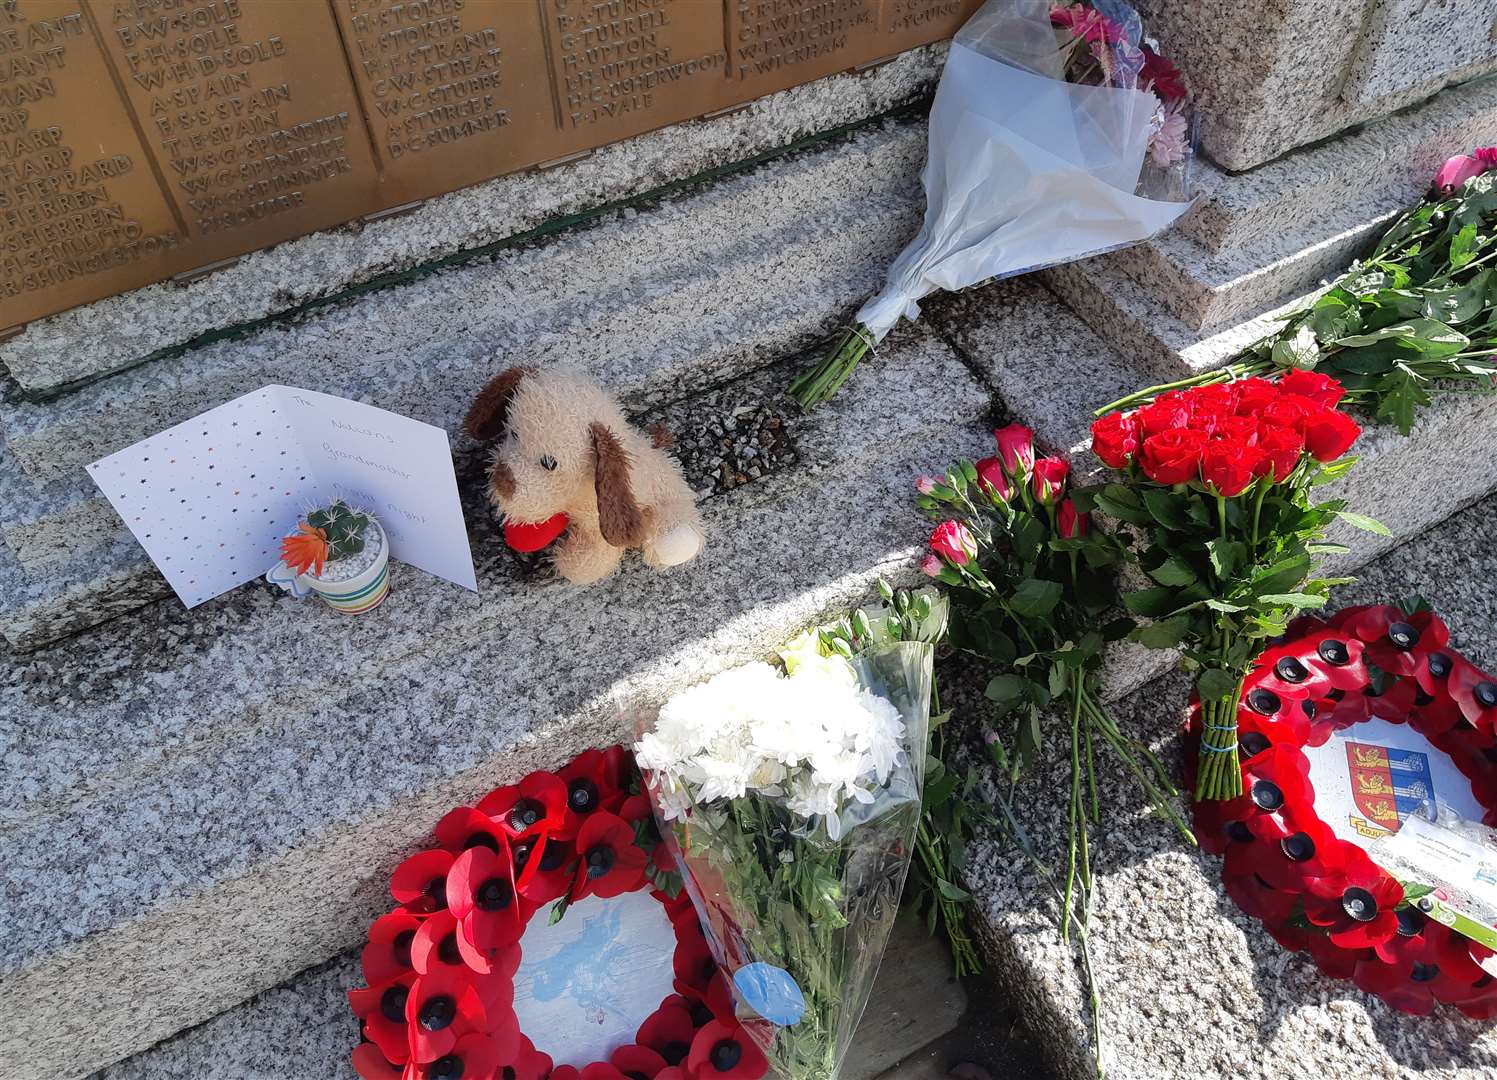 Floral tributes begin to appear at Dover War Memorial alongside existing Remembrance wreaths